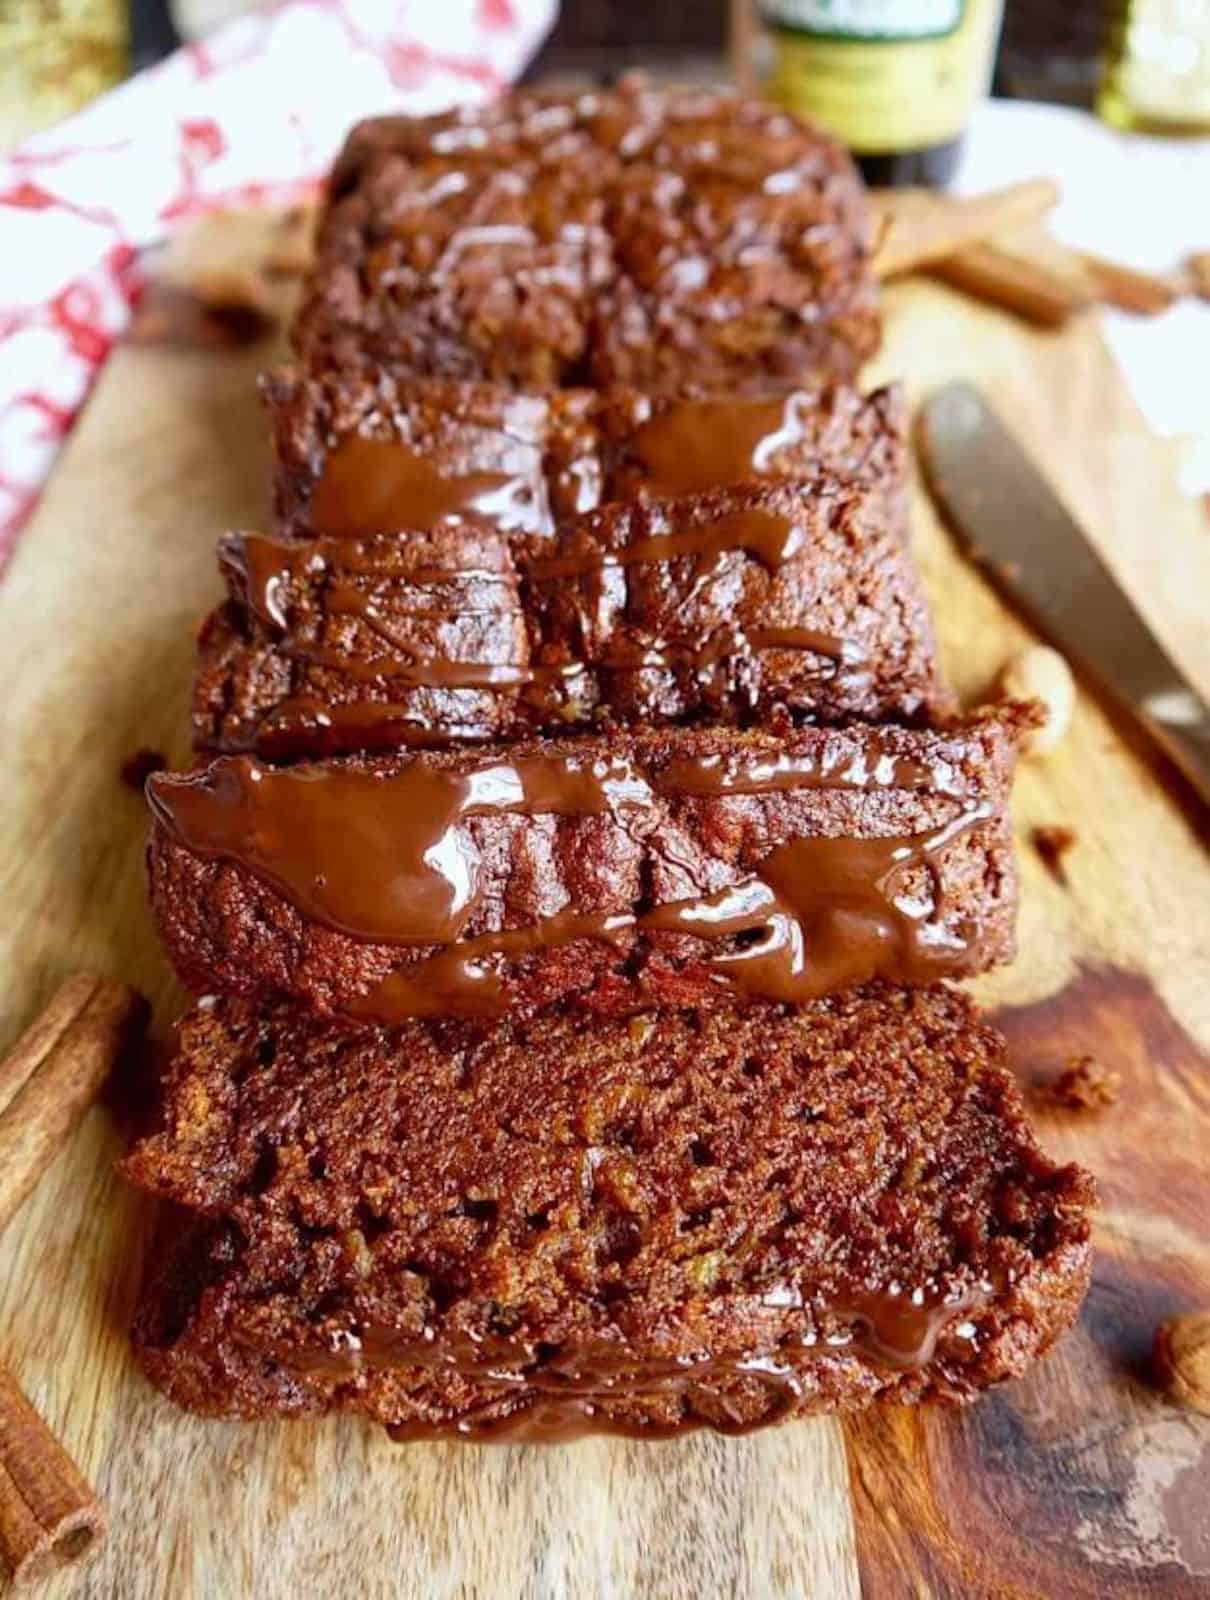 Gingerbread banana bread sliced on a serving tray.